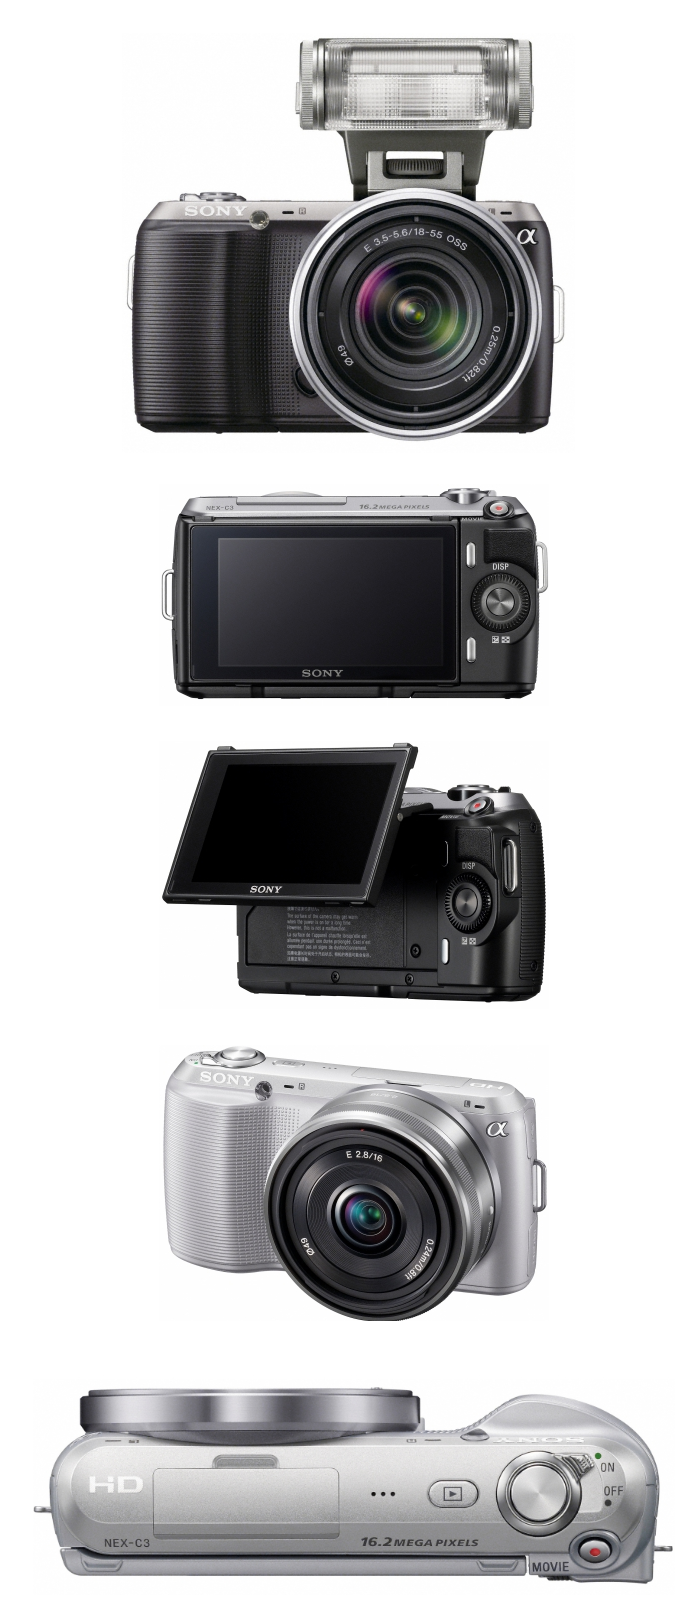 Reasons Why The Sony NEX-C3 May Be Really Awesome